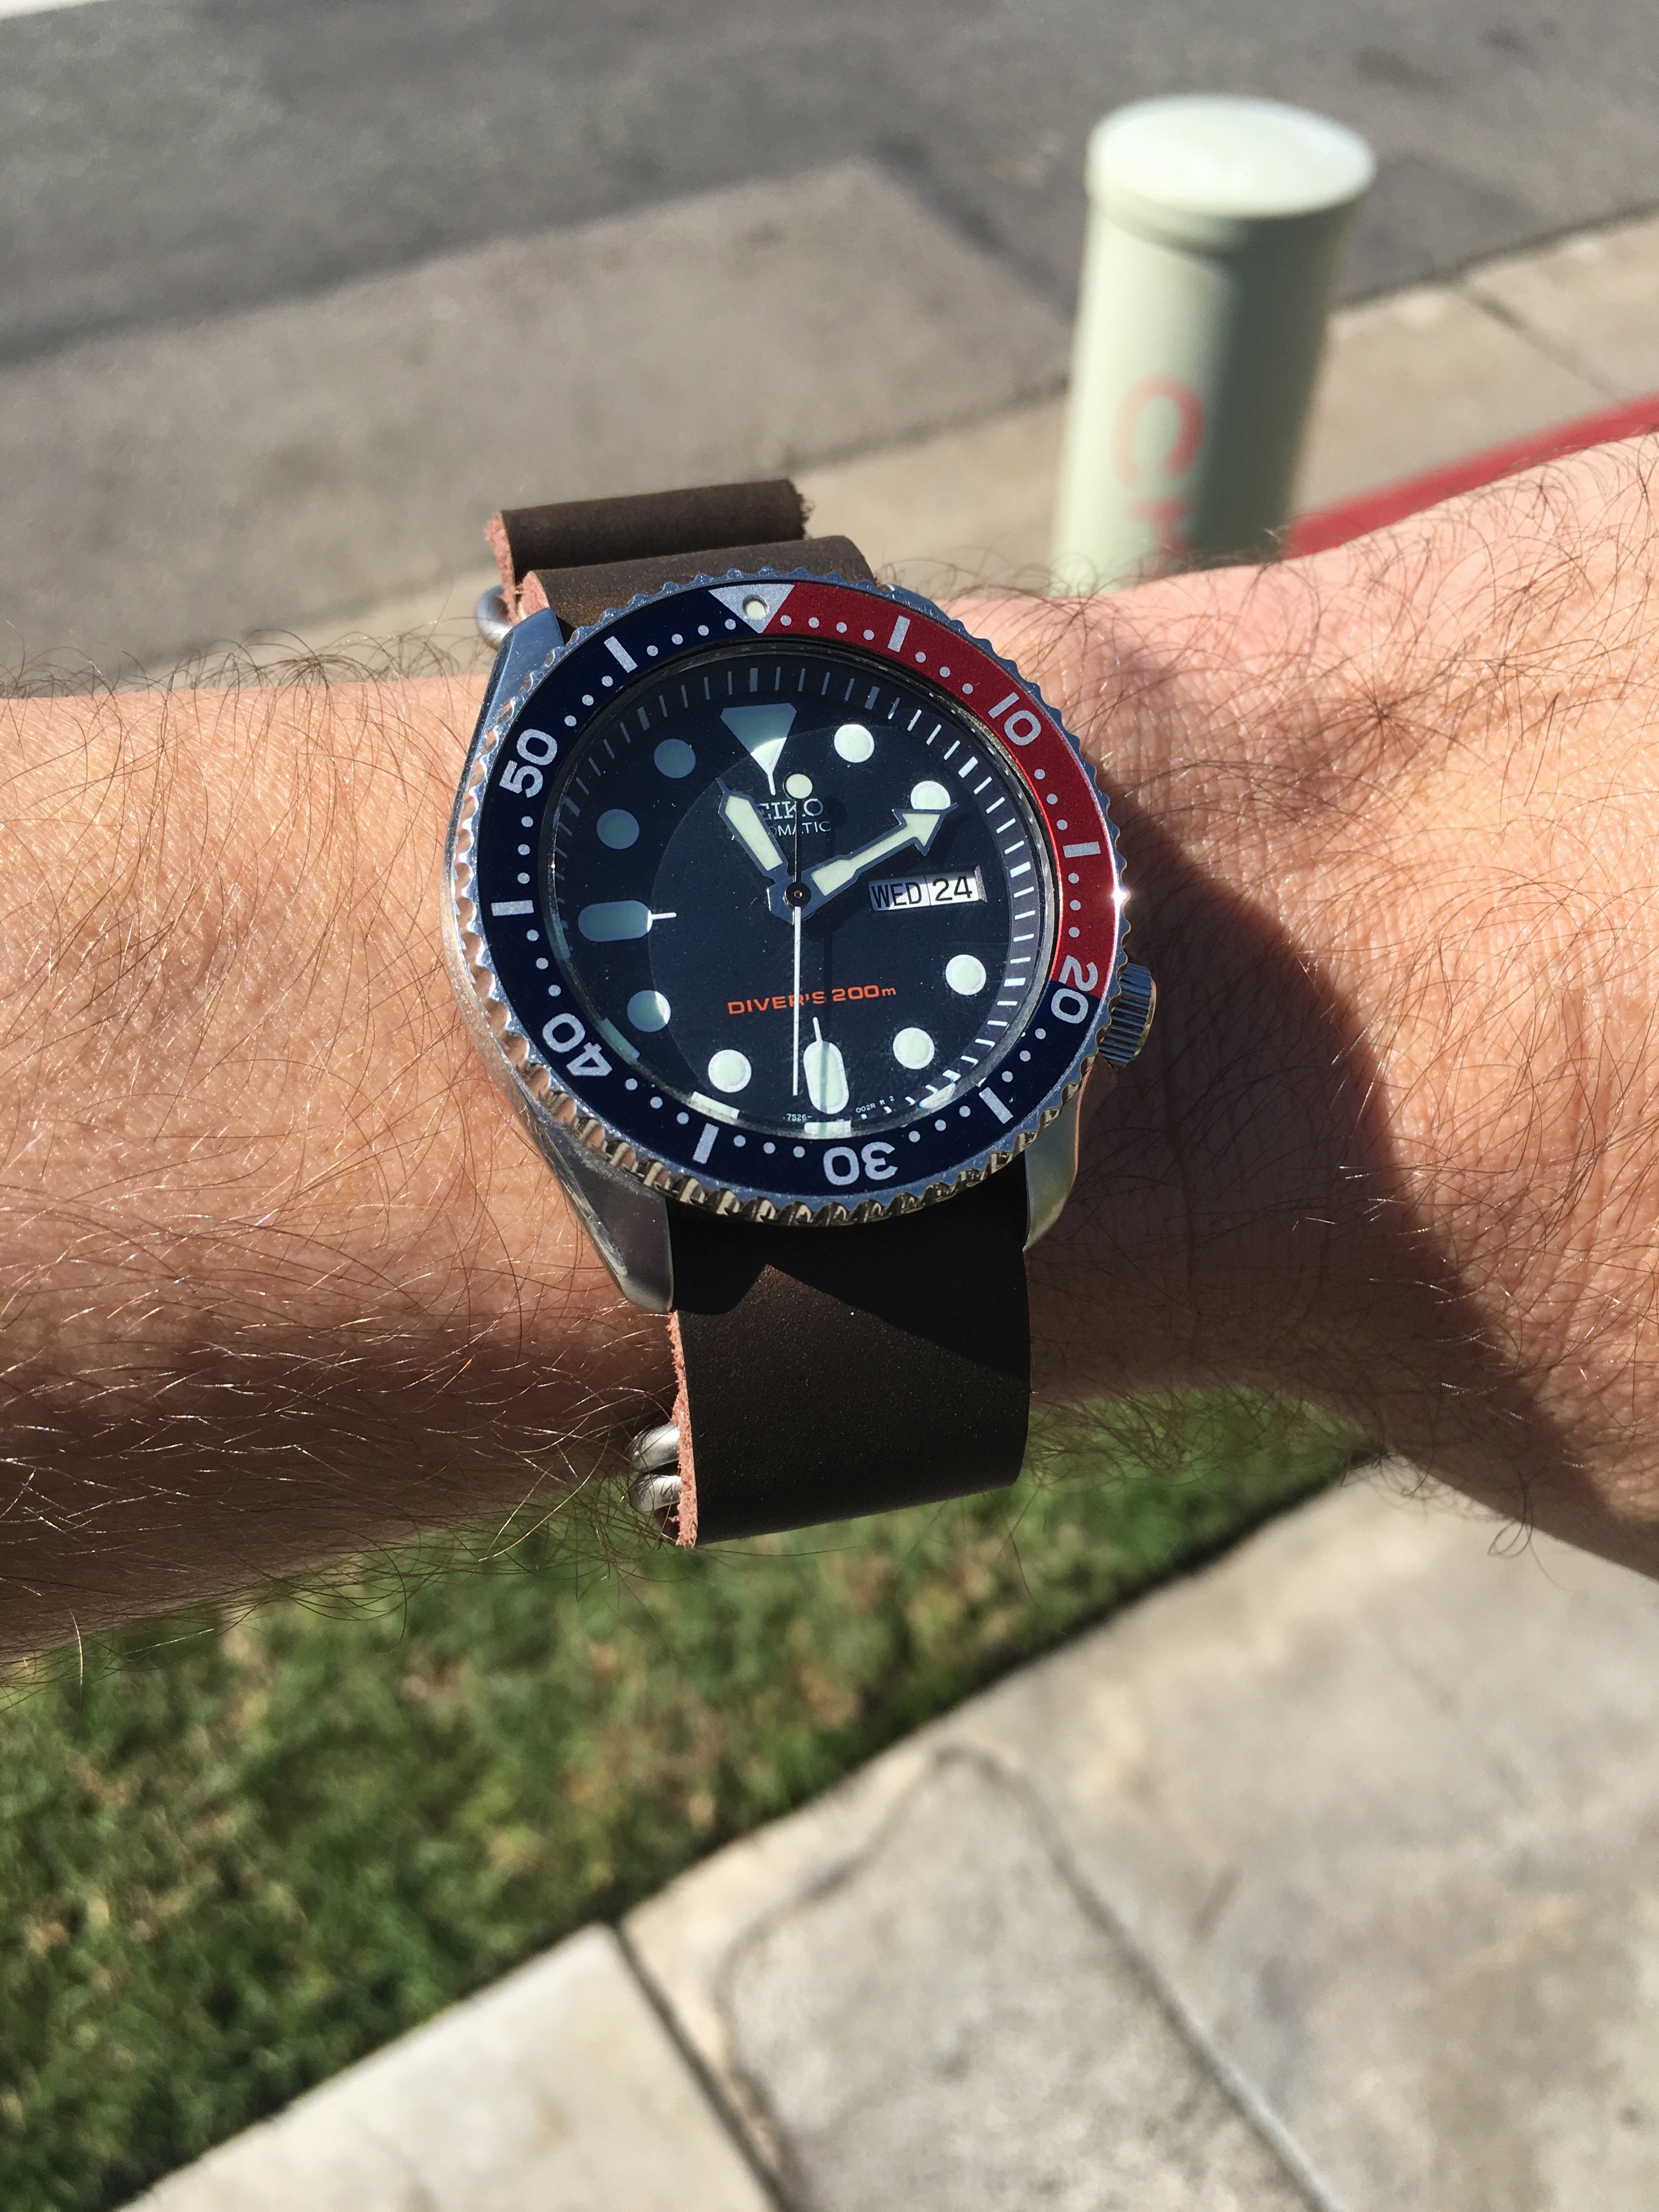 Is There a Better Every Day 'Beater' Watch? | Omega Forums